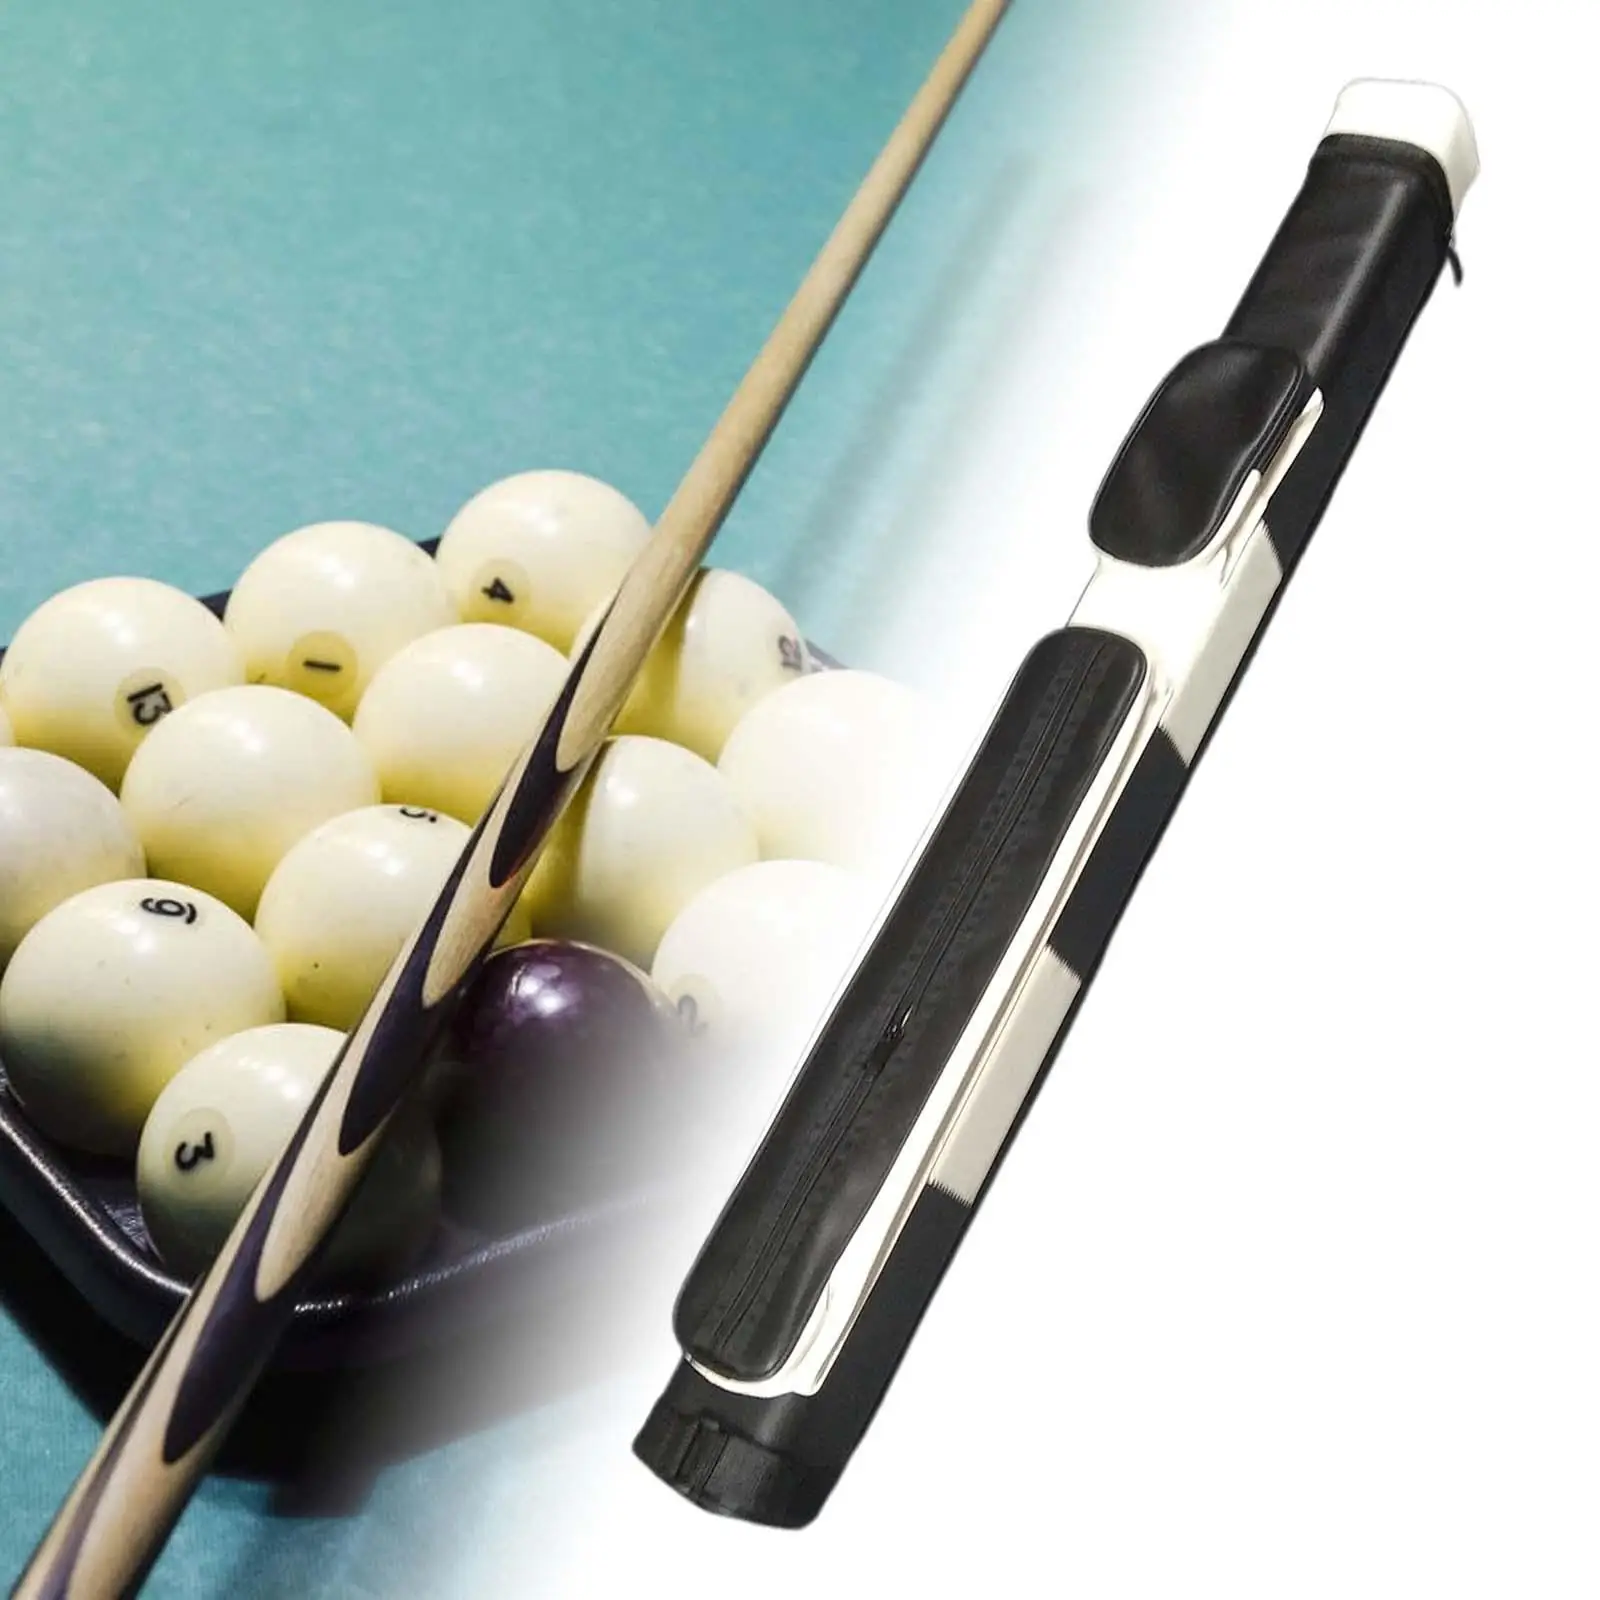 4 Holes Pool Cue Case with Divider 1/2 Pool Cue Protector Hard Tube Billiard Sticks Carrying Case